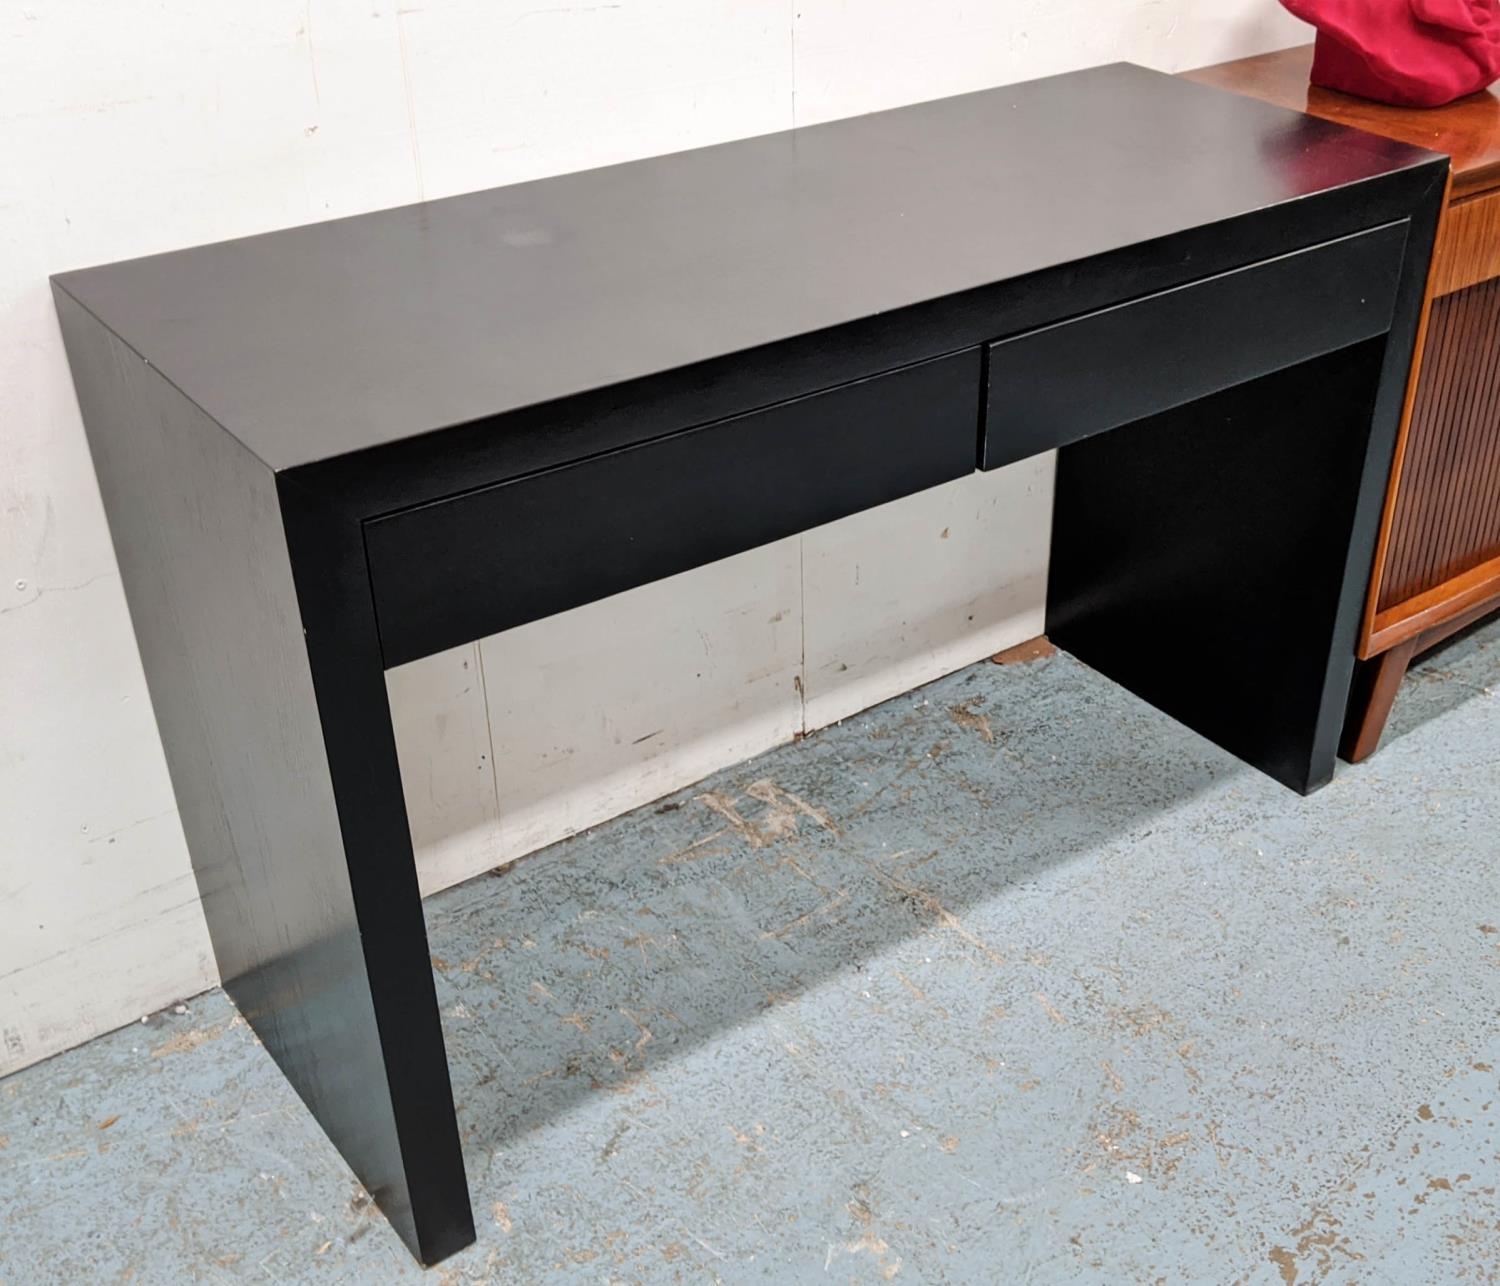 VANITY TABLE, 120cm x 45cm x 76cm, contemporary design, two drawers. - Image 2 of 5